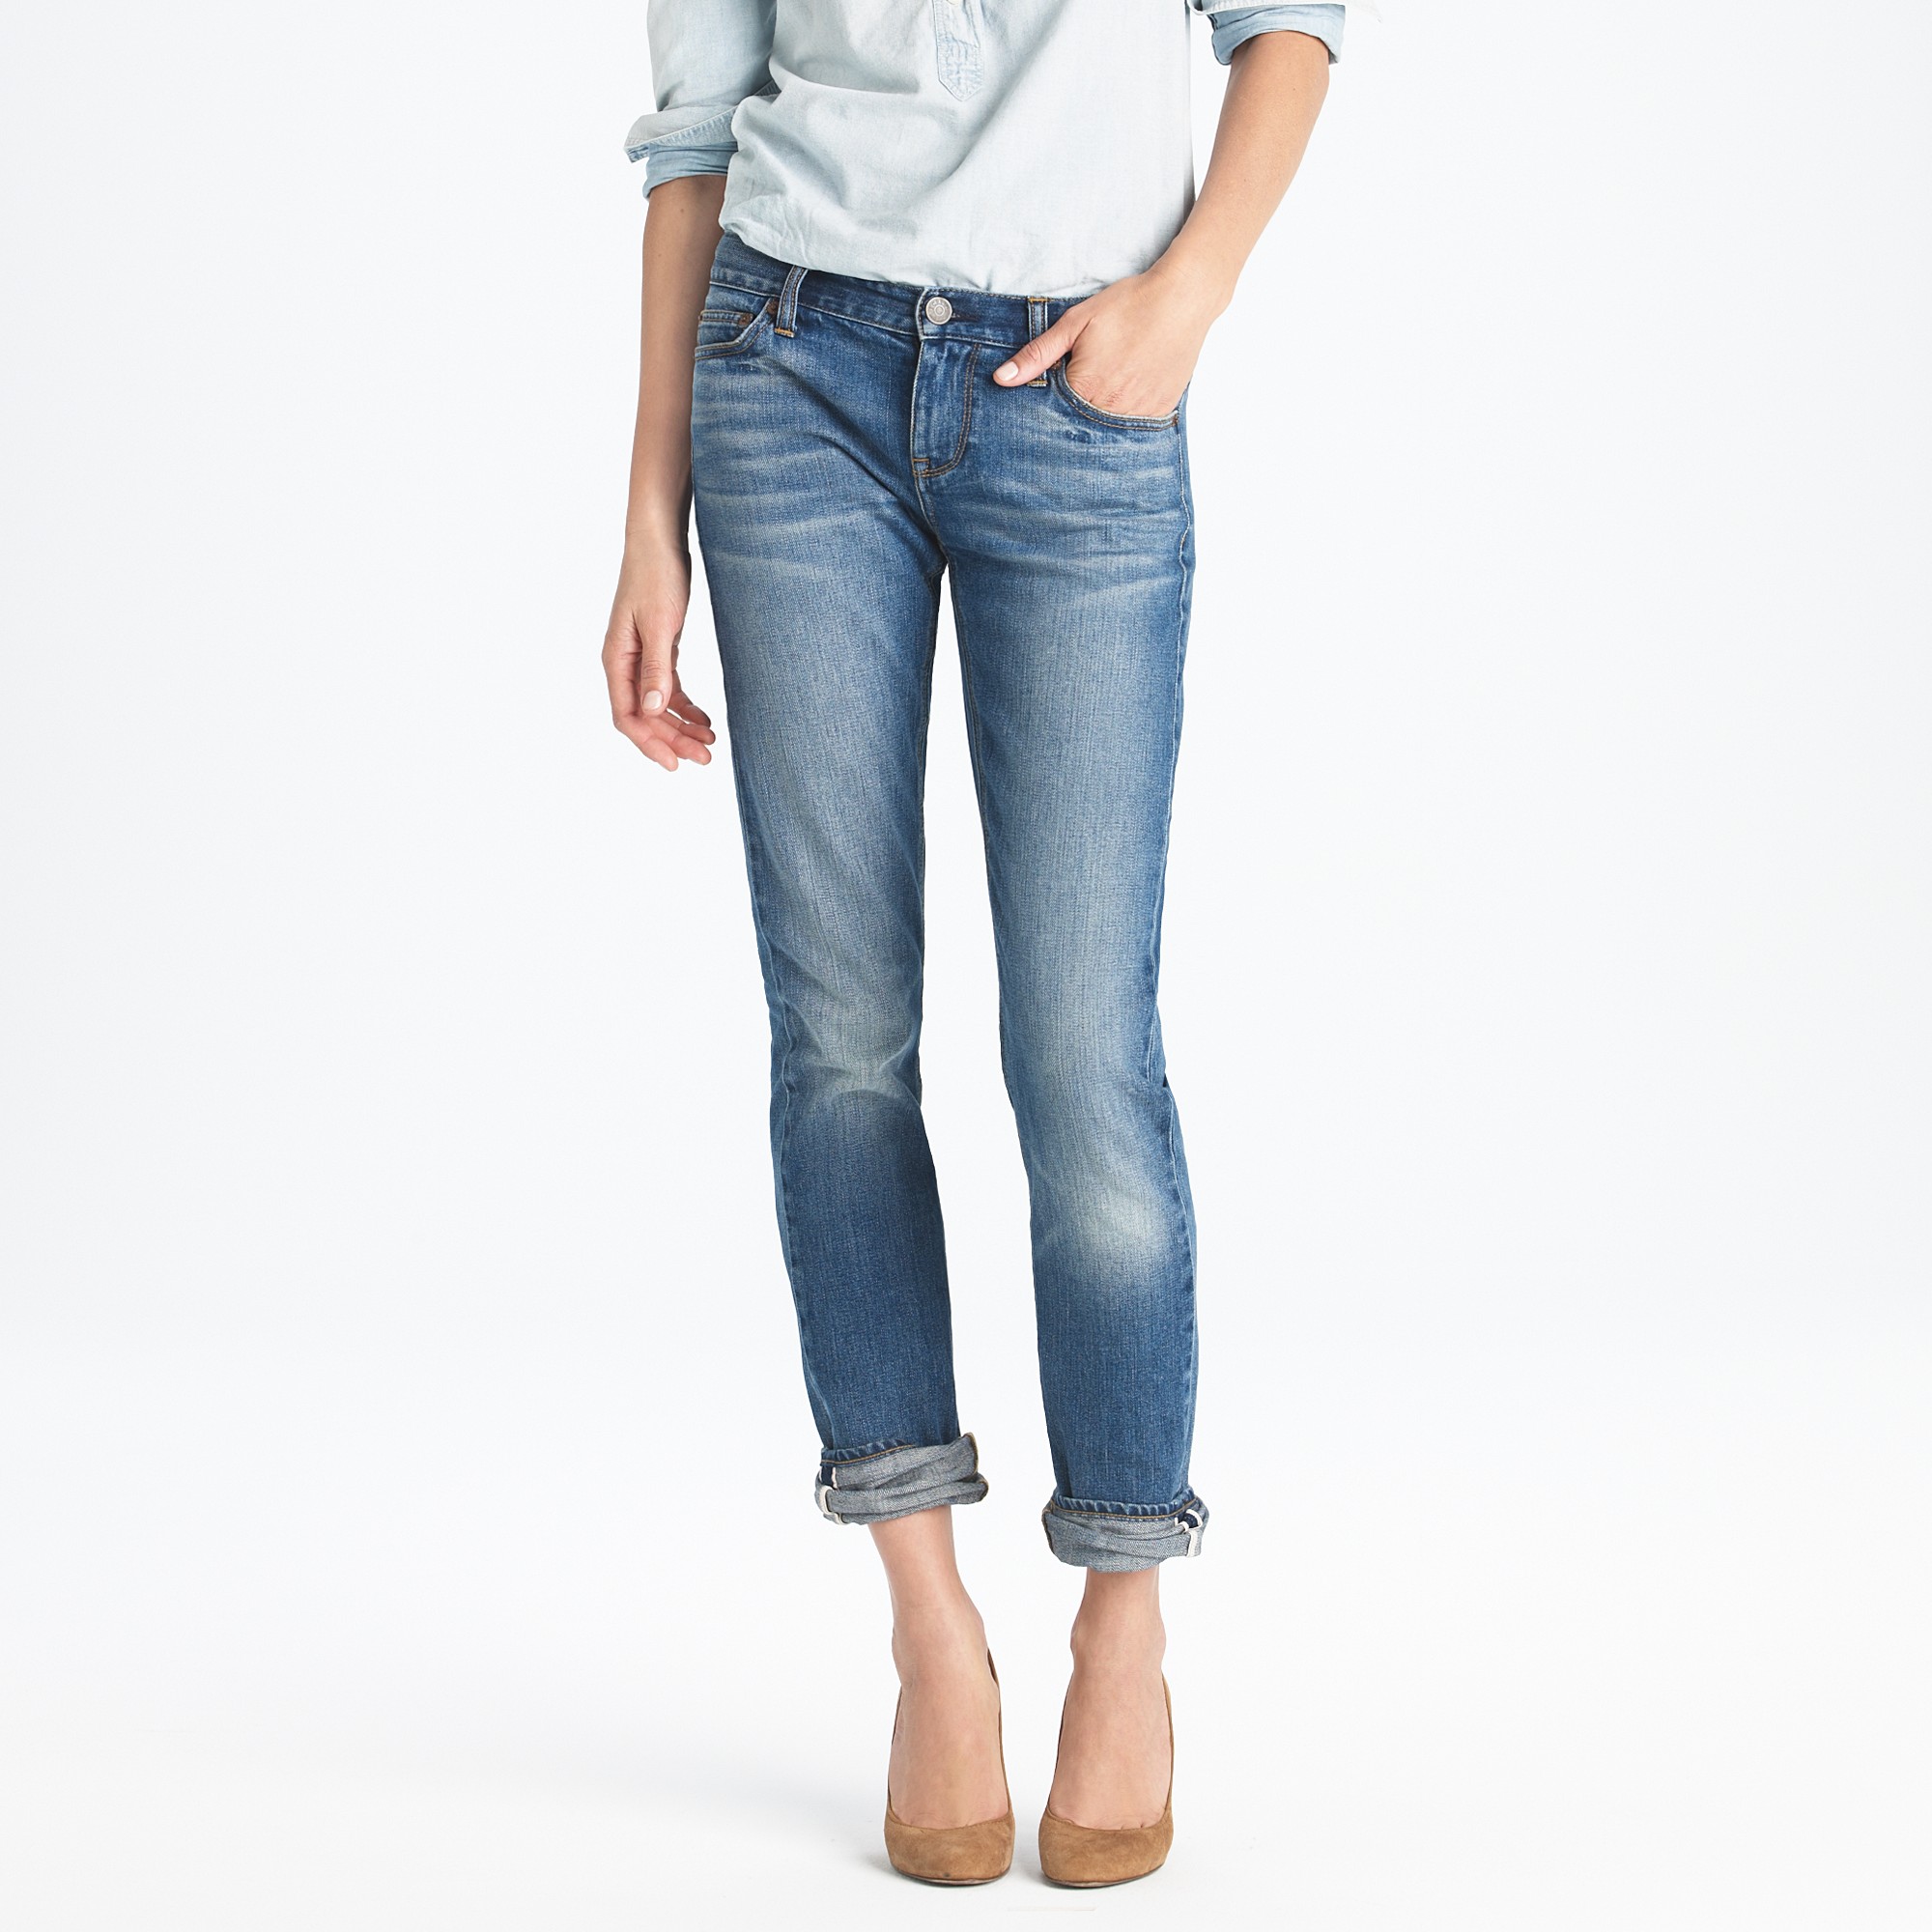 Lyst - J.Crew Matchstick Jean in Selvedge in Blue